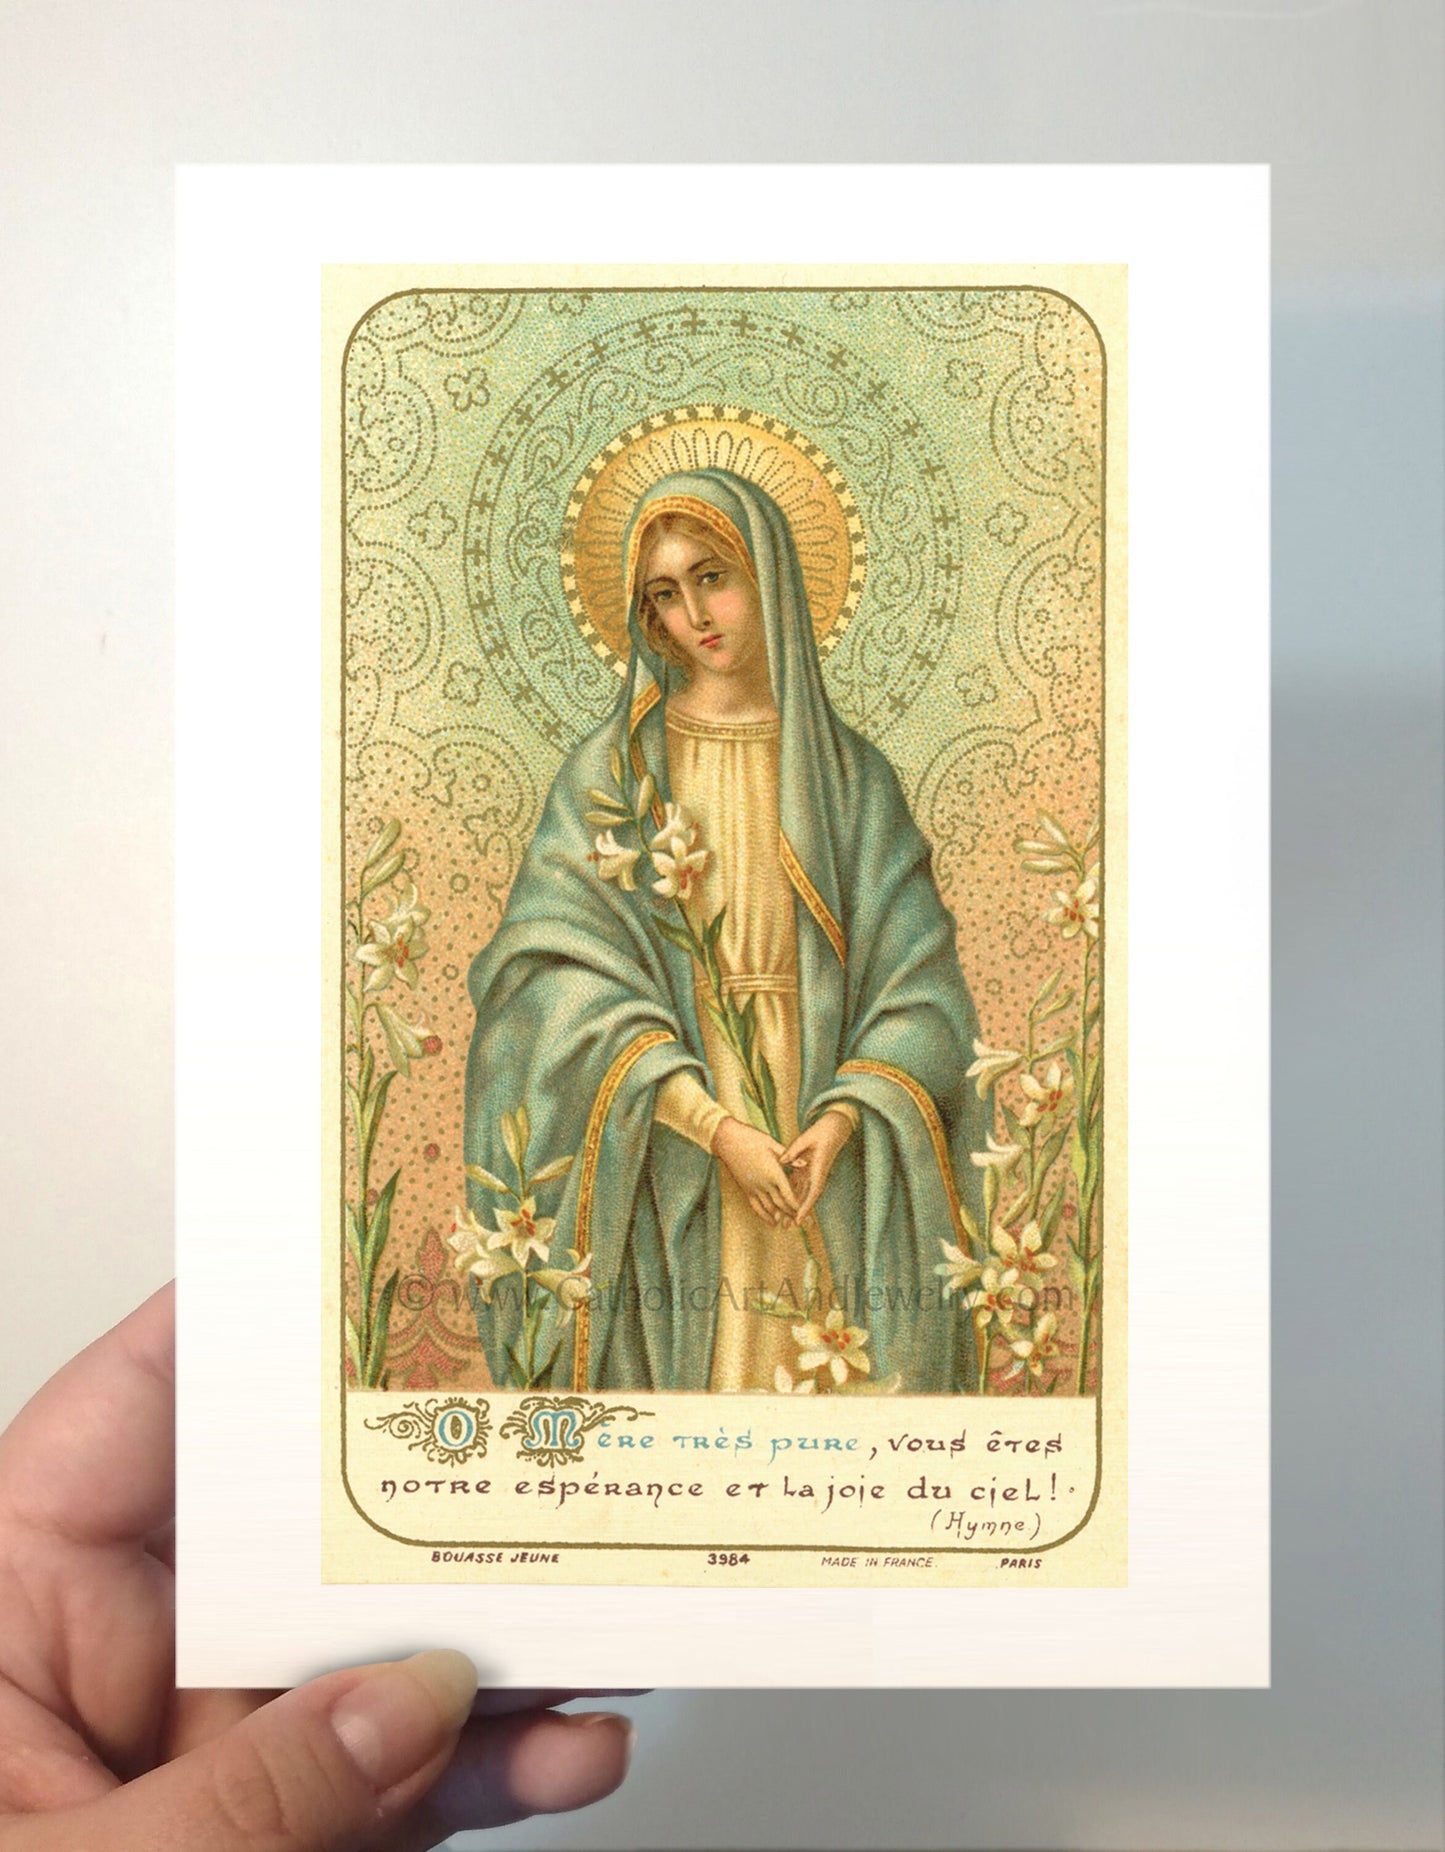 Our Lady of the Lilies – Based on a Vintage French Holy Card